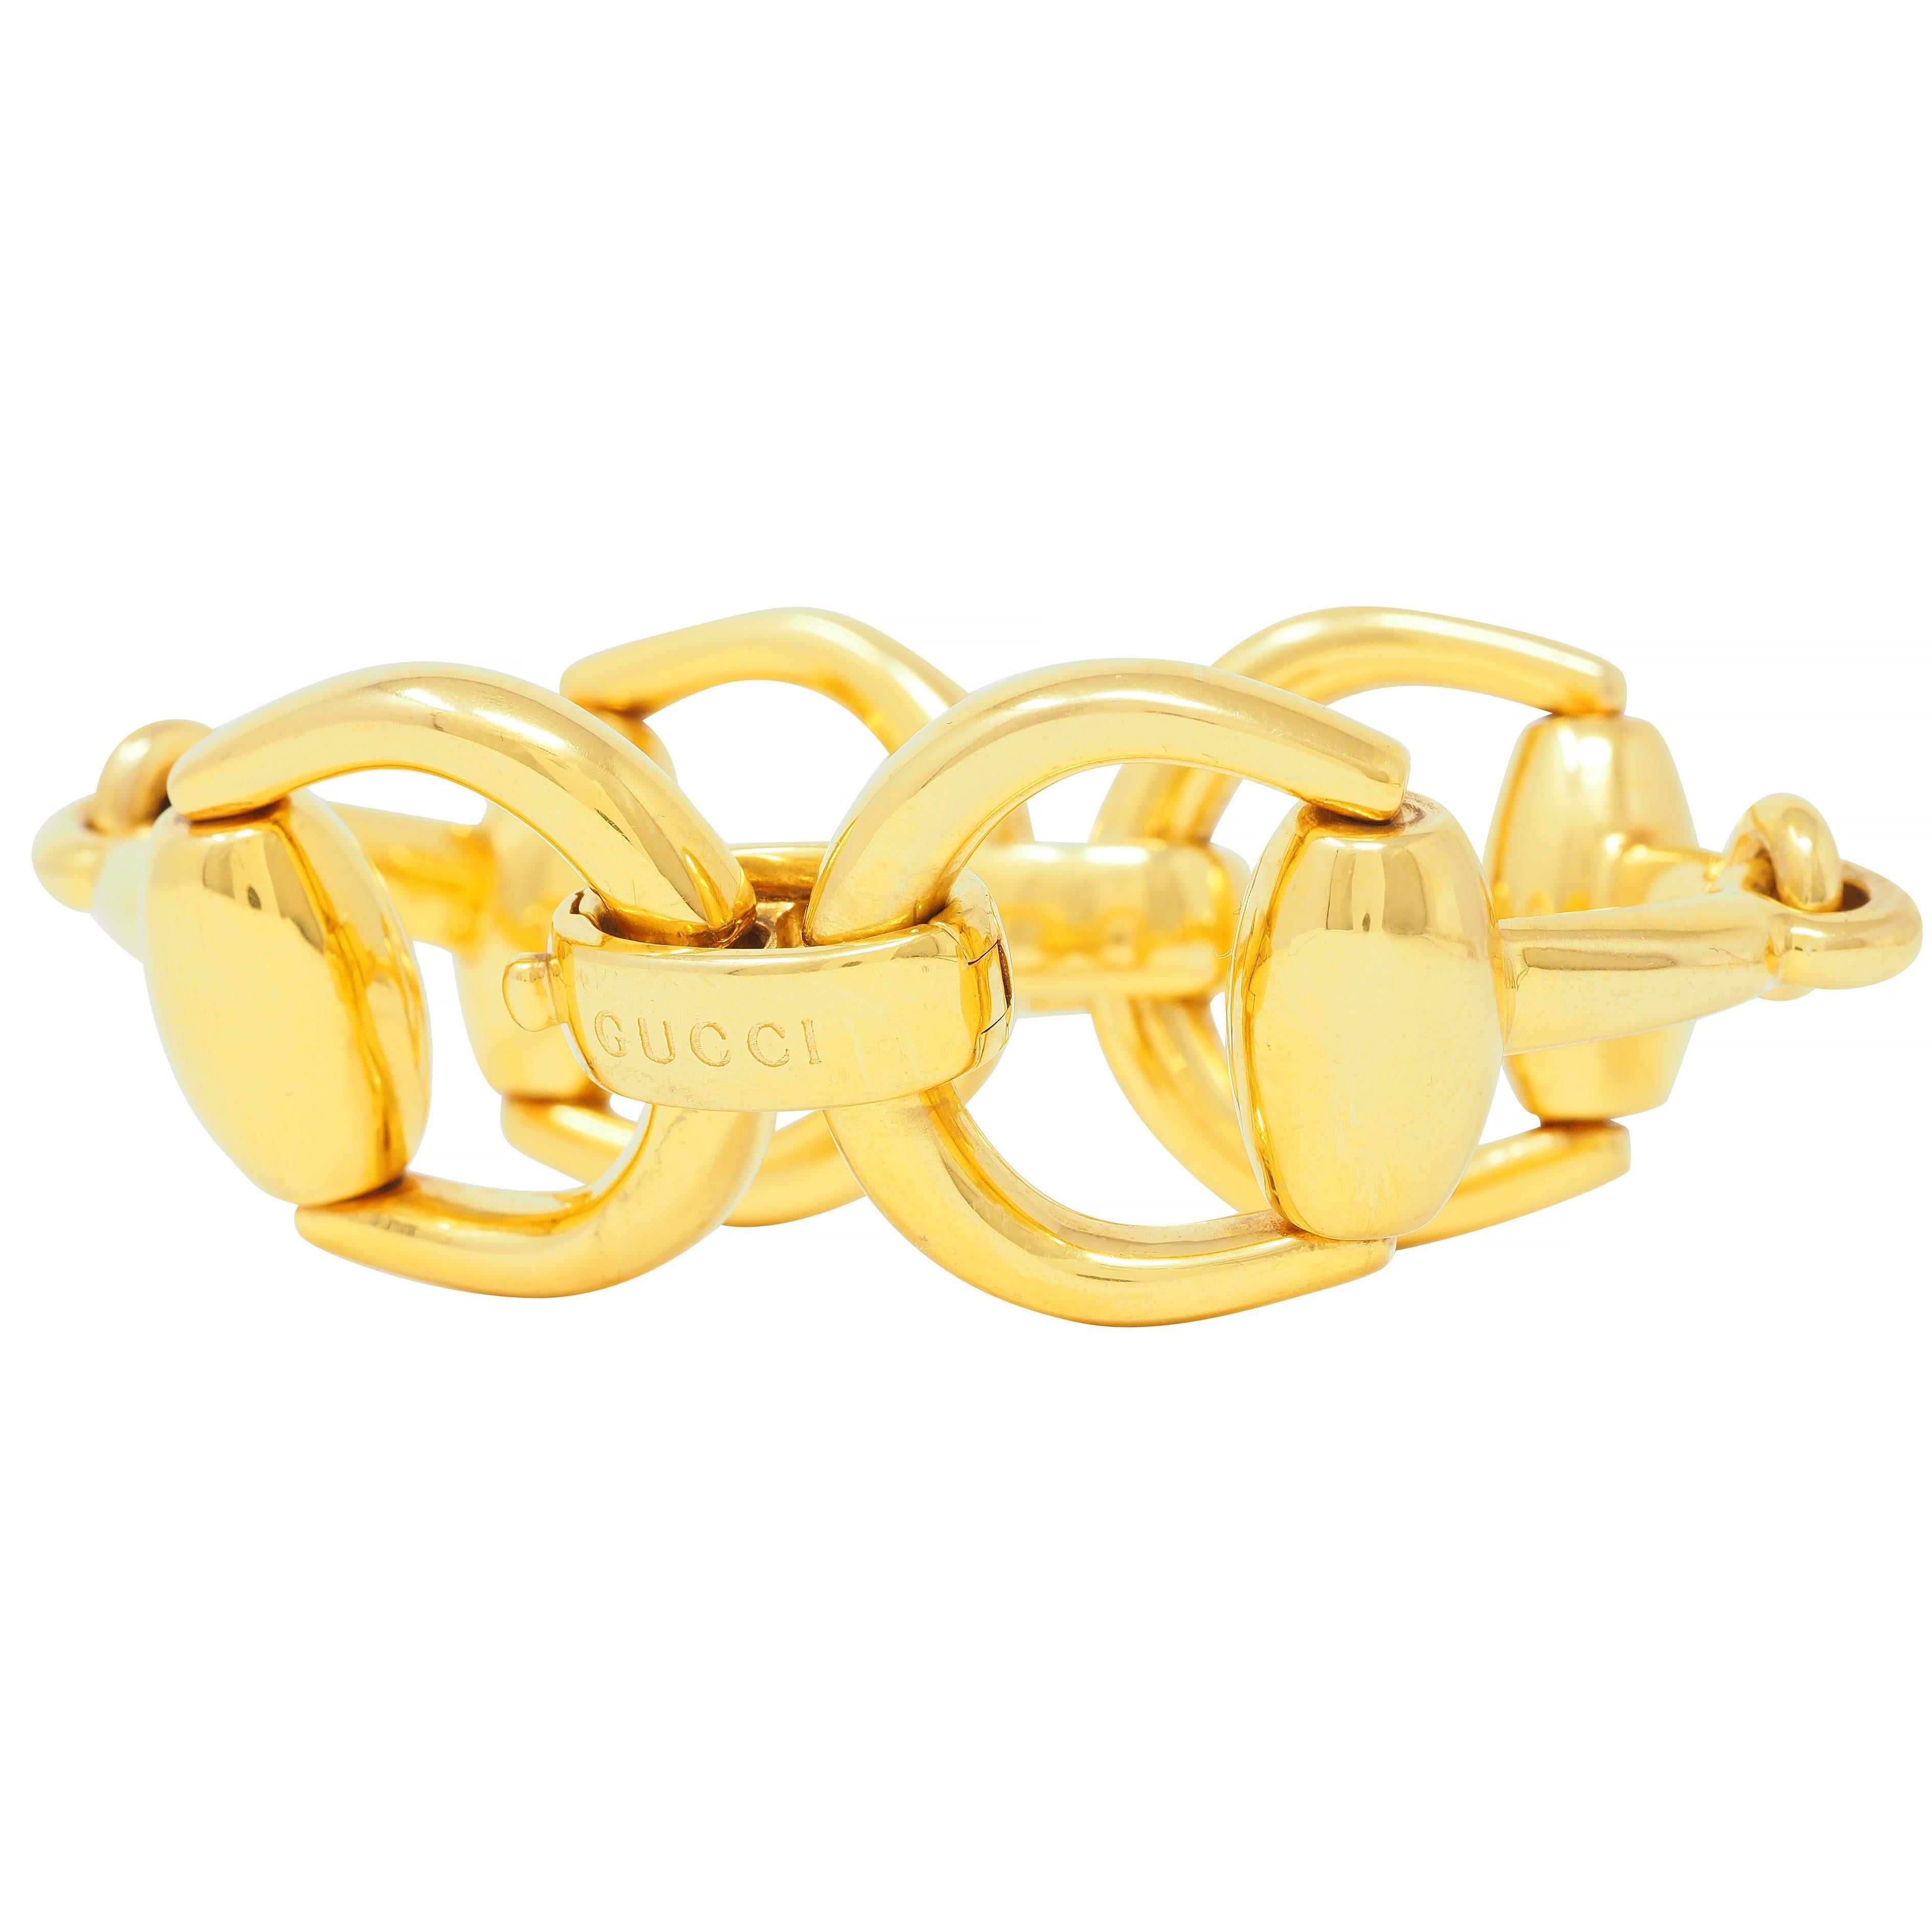 Bracelet is designed as large horsebit motif links
Connected via large oval shaped links
With high polished gold finish
Terminating horse-bit is hinged as clasp closure
Stamped 750 with Italian assay marks for 18 karat gold
Fully signed Gucci, Made